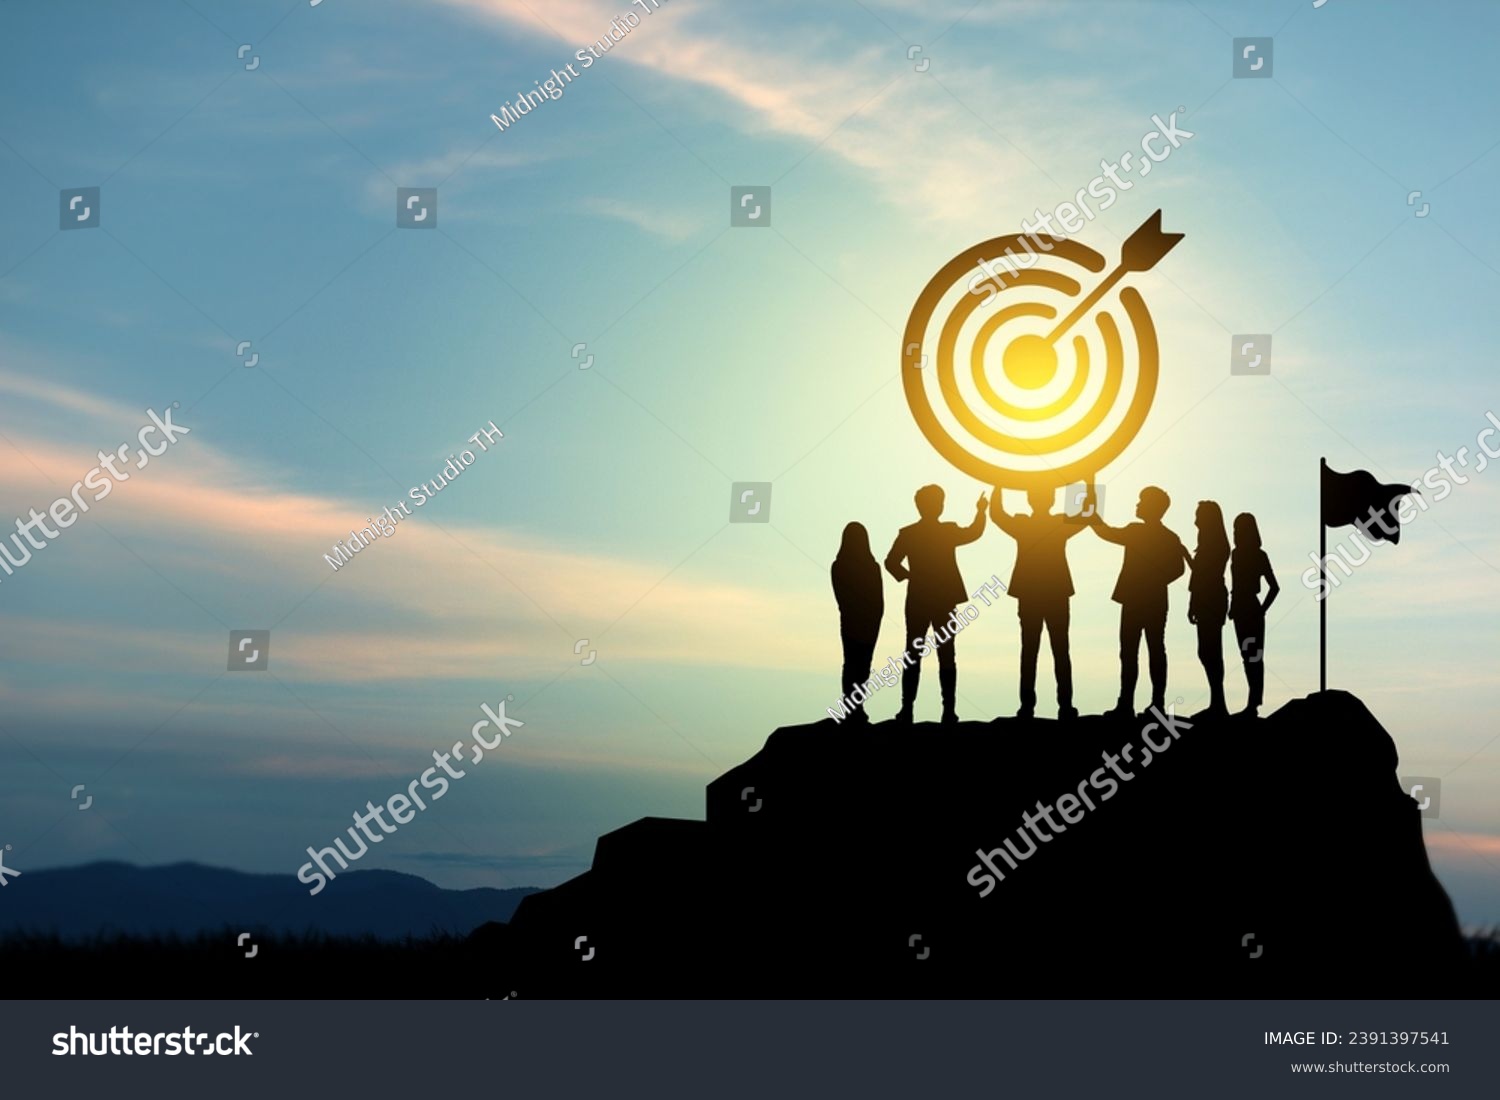 Goal setting towards planning for the future. Silhouettes of group businessmen holding target boards with flags planted on a mountain. Concept of a clear planning process and teamwork. #2391397541